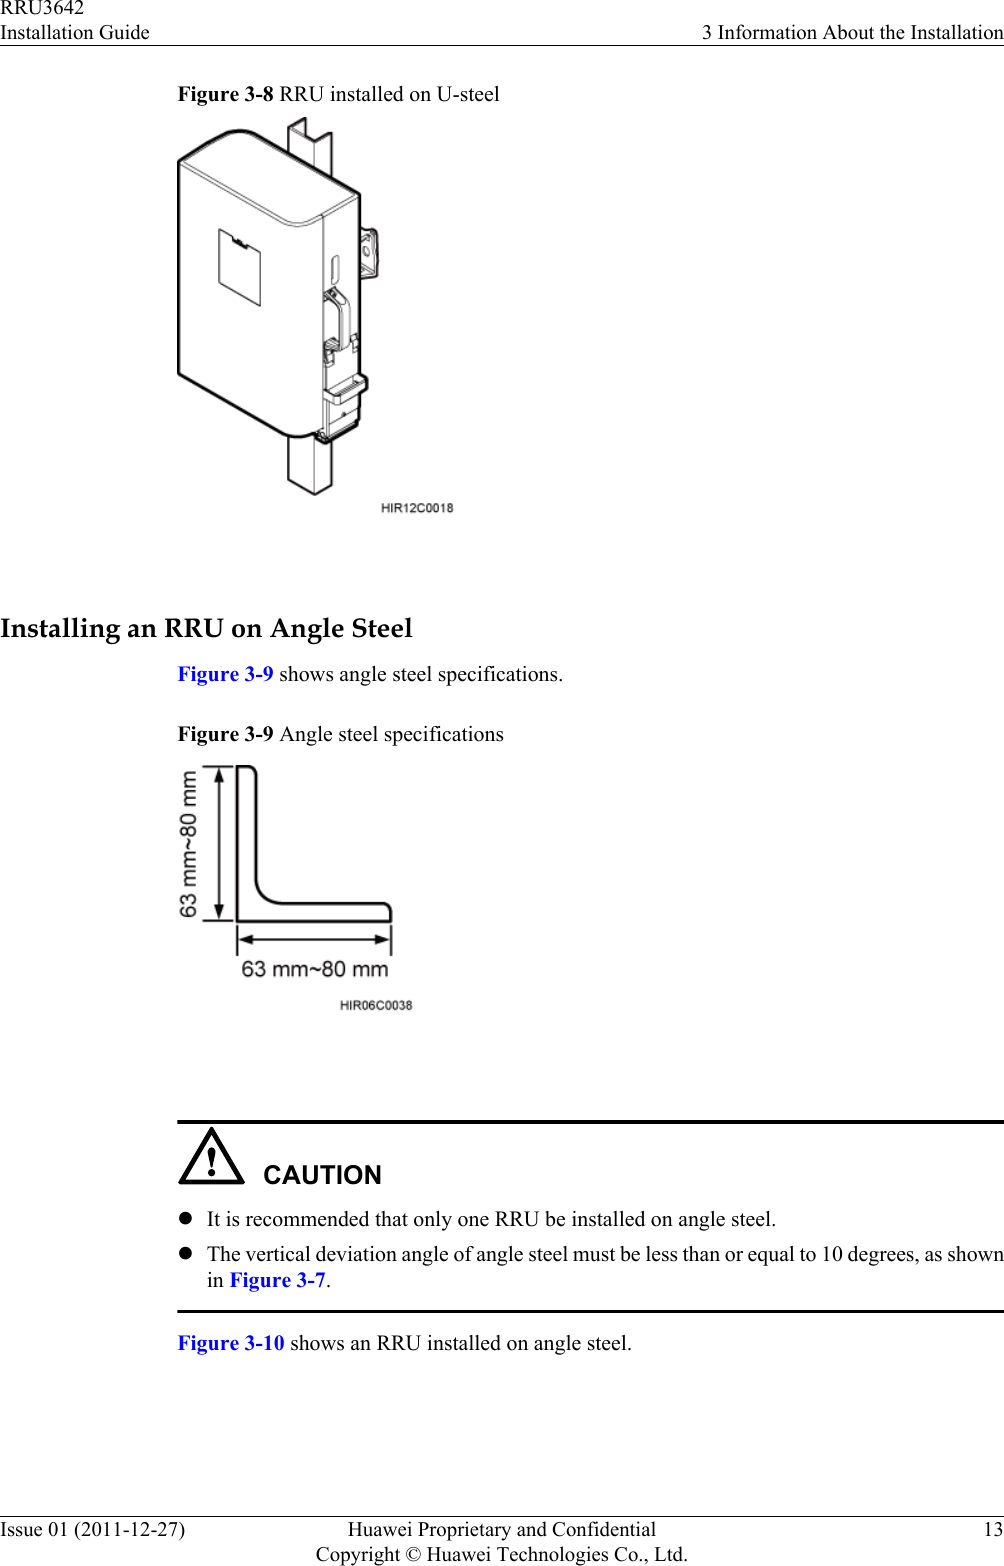 Figure 3-8 RRU installed on U-steel Installing an RRU on Angle SteelFigure 3-9 shows angle steel specifications.Figure 3-9 Angle steel specifications CAUTIONlIt is recommended that only one RRU be installed on angle steel.lThe vertical deviation angle of angle steel must be less than or equal to 10 degrees, as shownin Figure 3-7.Figure 3-10 shows an RRU installed on angle steel.RRU3642Installation Guide 3 Information About the InstallationIssue 01 (2011-12-27) Huawei Proprietary and ConfidentialCopyright © Huawei Technologies Co., Ltd.13